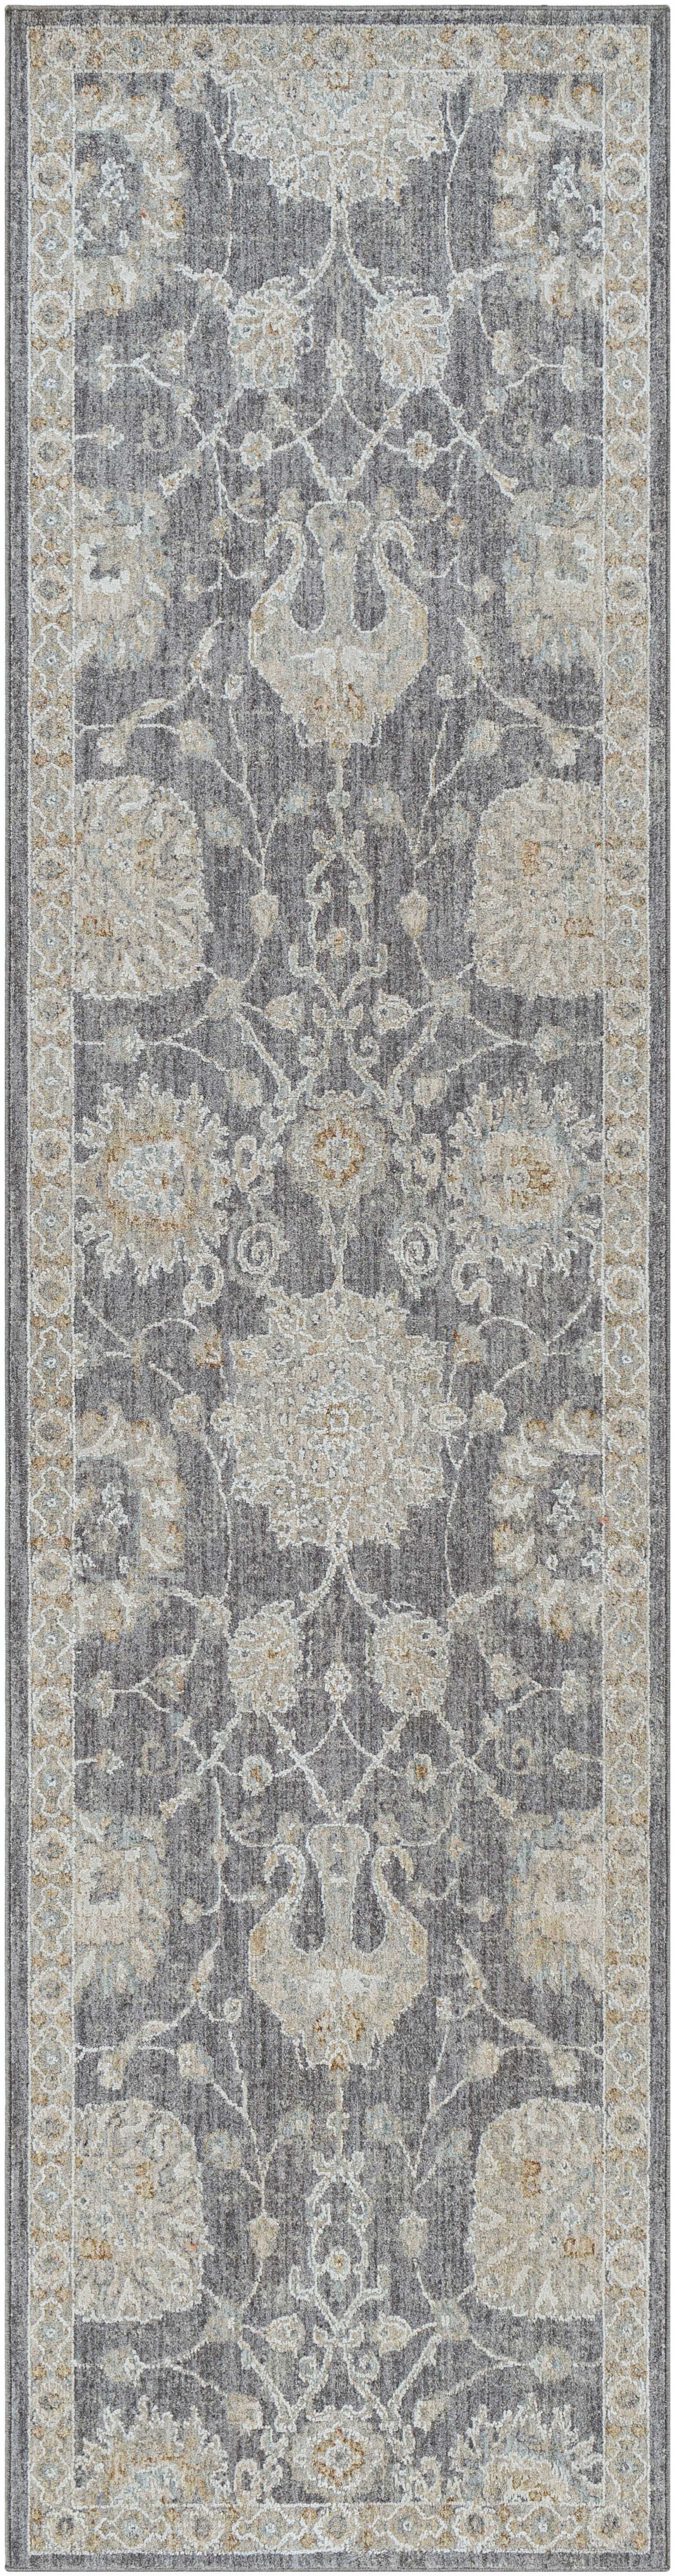 Boutique Rugs Rugs 2'7" x 10' Runner Kanimbla Area Rug